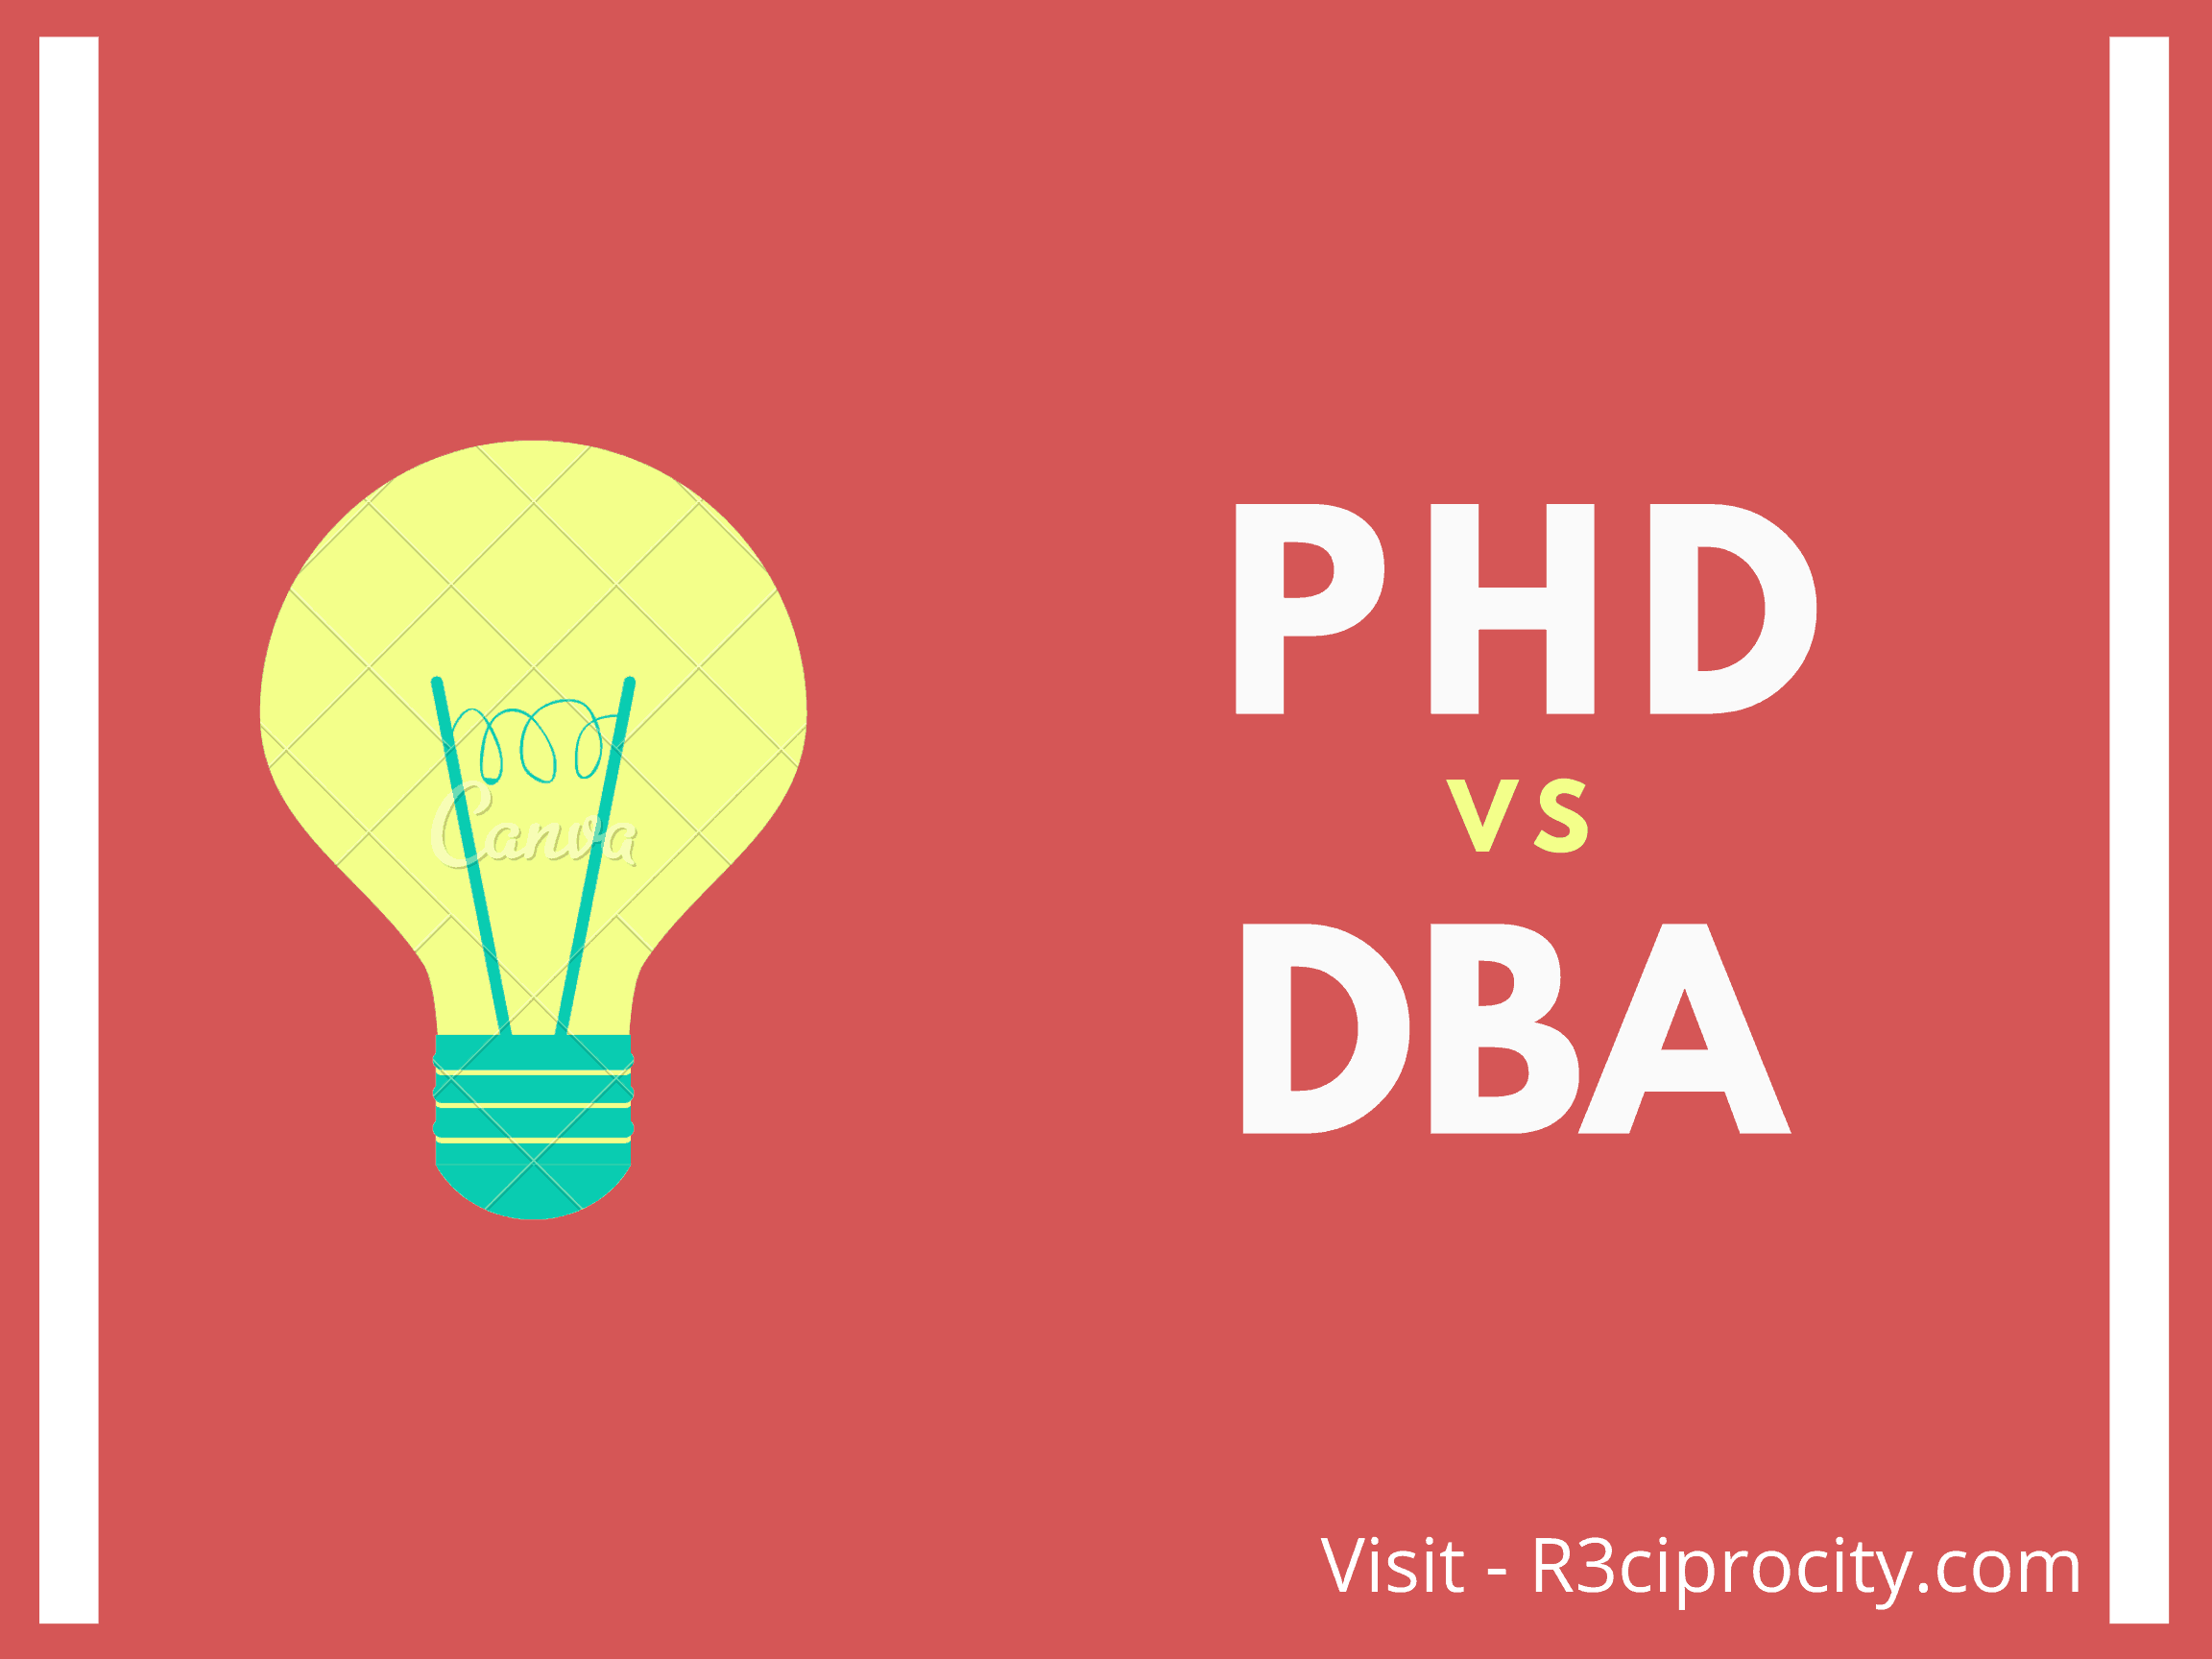 dba or phd which is better